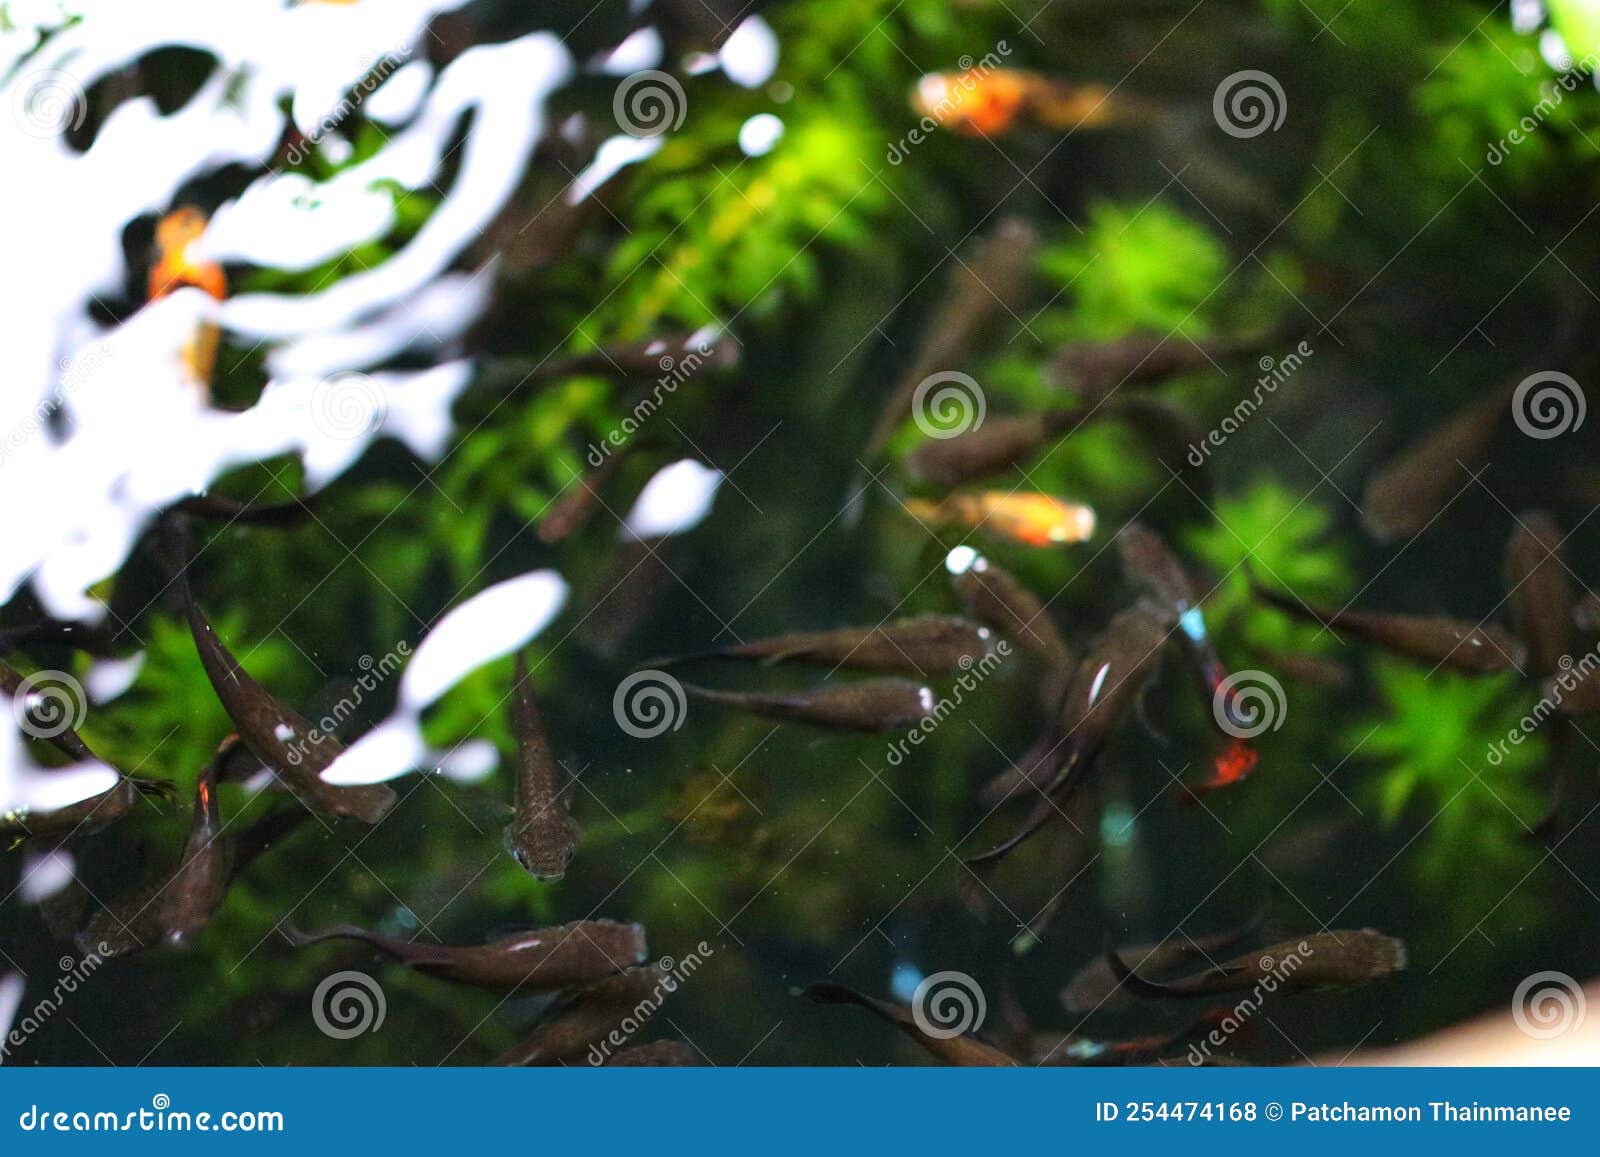 Top View, Many Guppy Fish, Rearing in the Pond. Stock Photo - Image of  guppy, view: 254474168